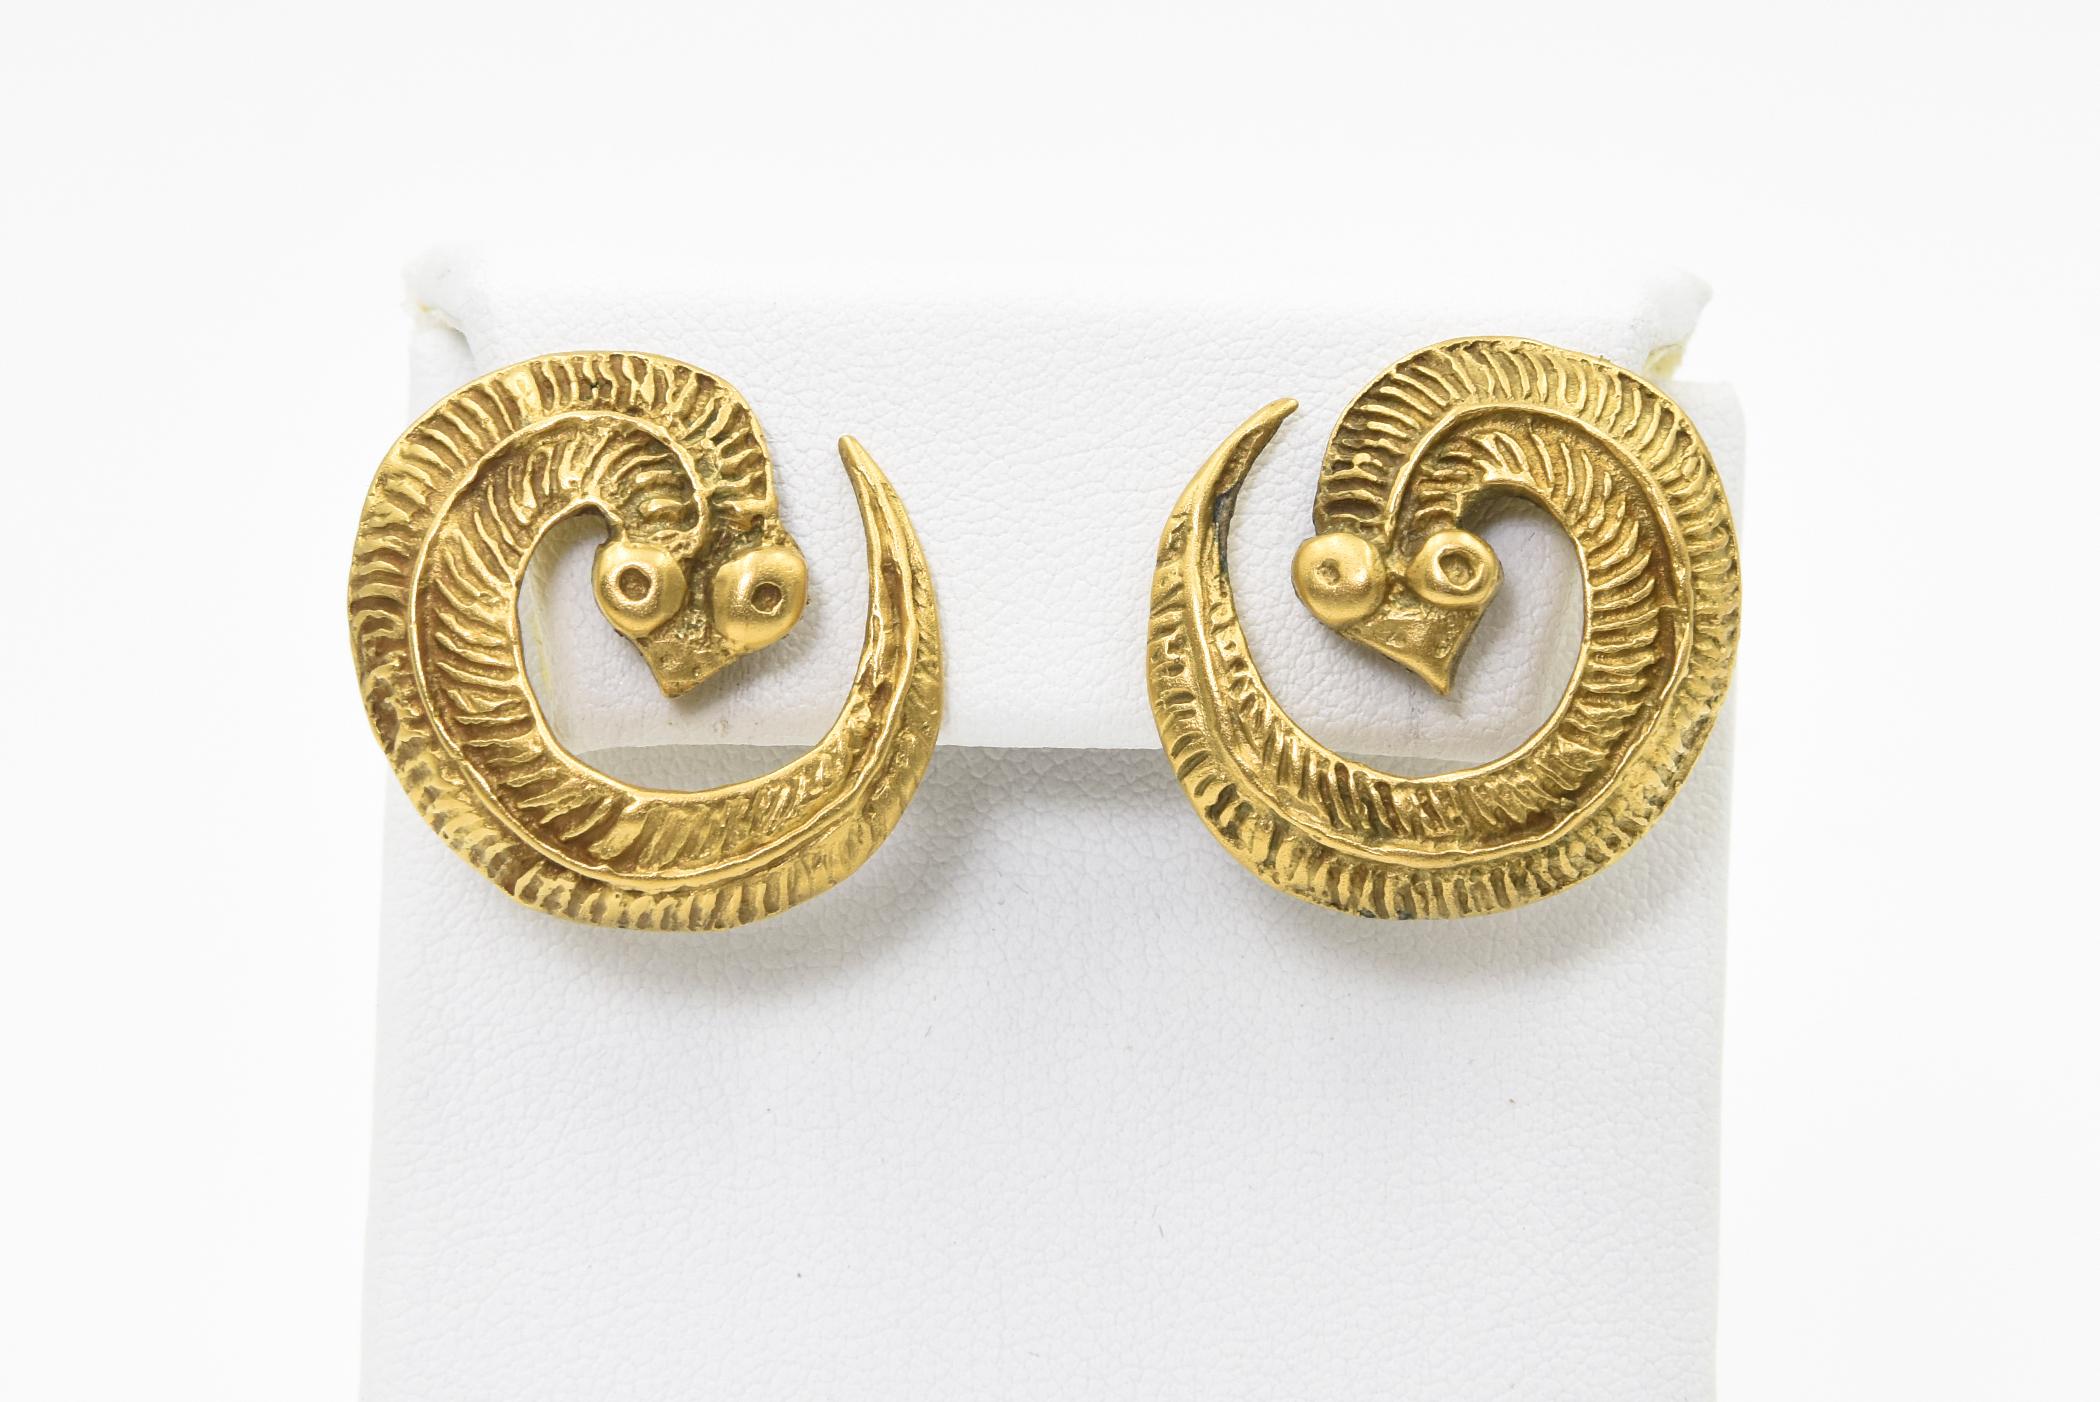 Vintage Metropolitan Museum of Art snake brass post earrings  - so you must have pierced ears.  They are marked MMA and have what look like Egyptian characters.